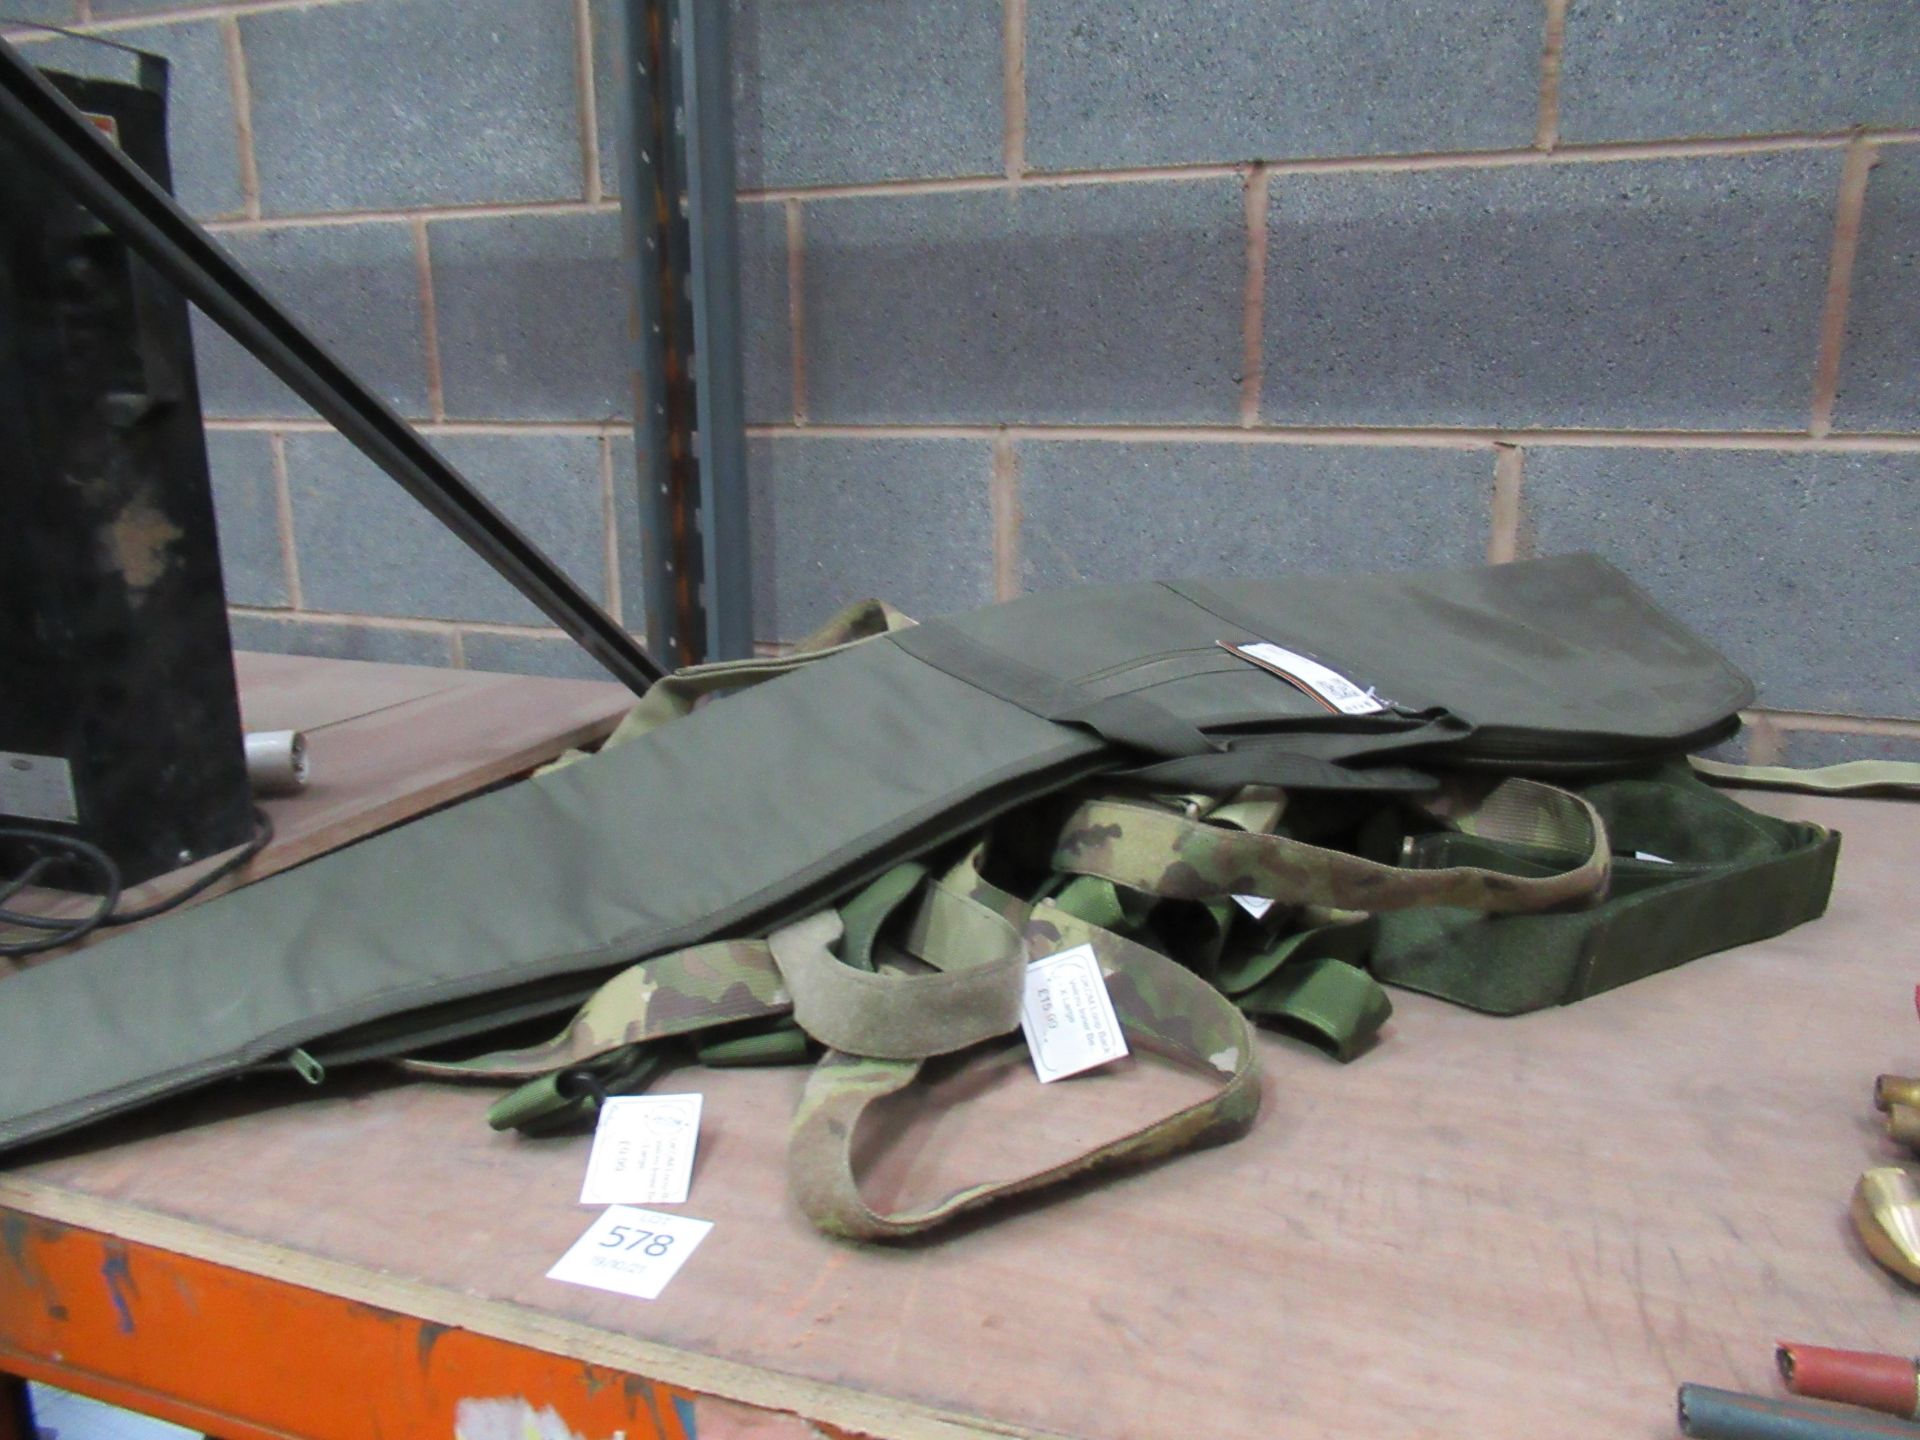 A qty of loop back military style velcro belts and a hunter gun bag